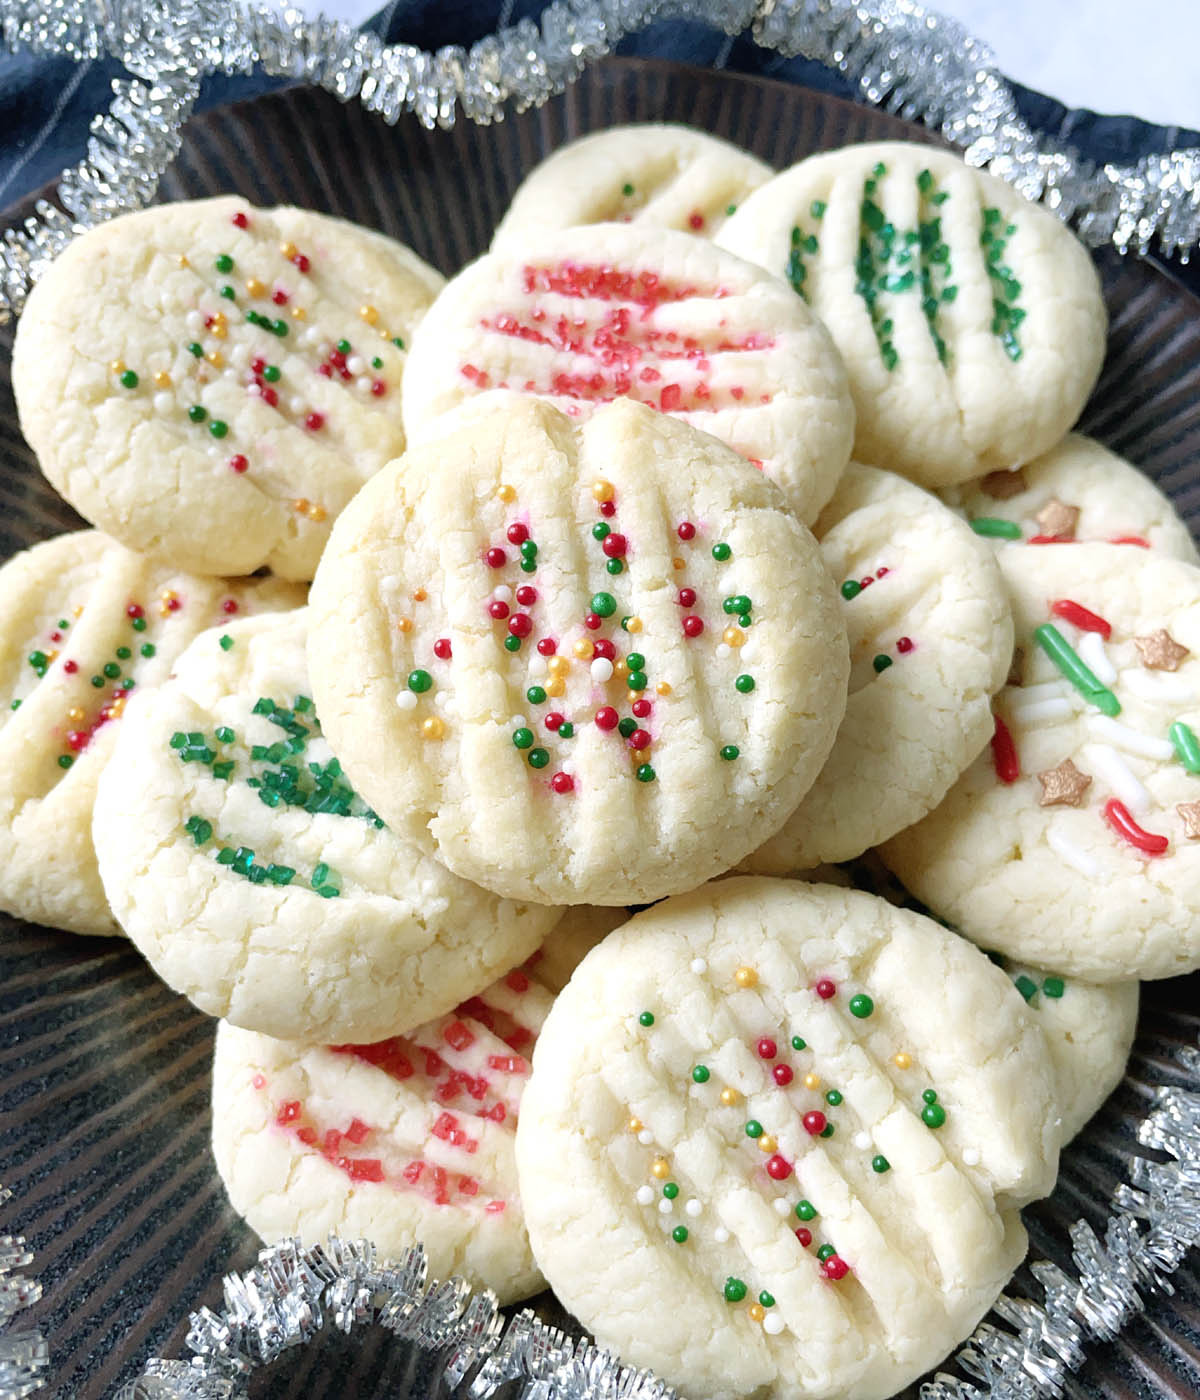 A round brown dish surrounded by silver garland and containing several light colored cookies with red and green and white sprinkles.